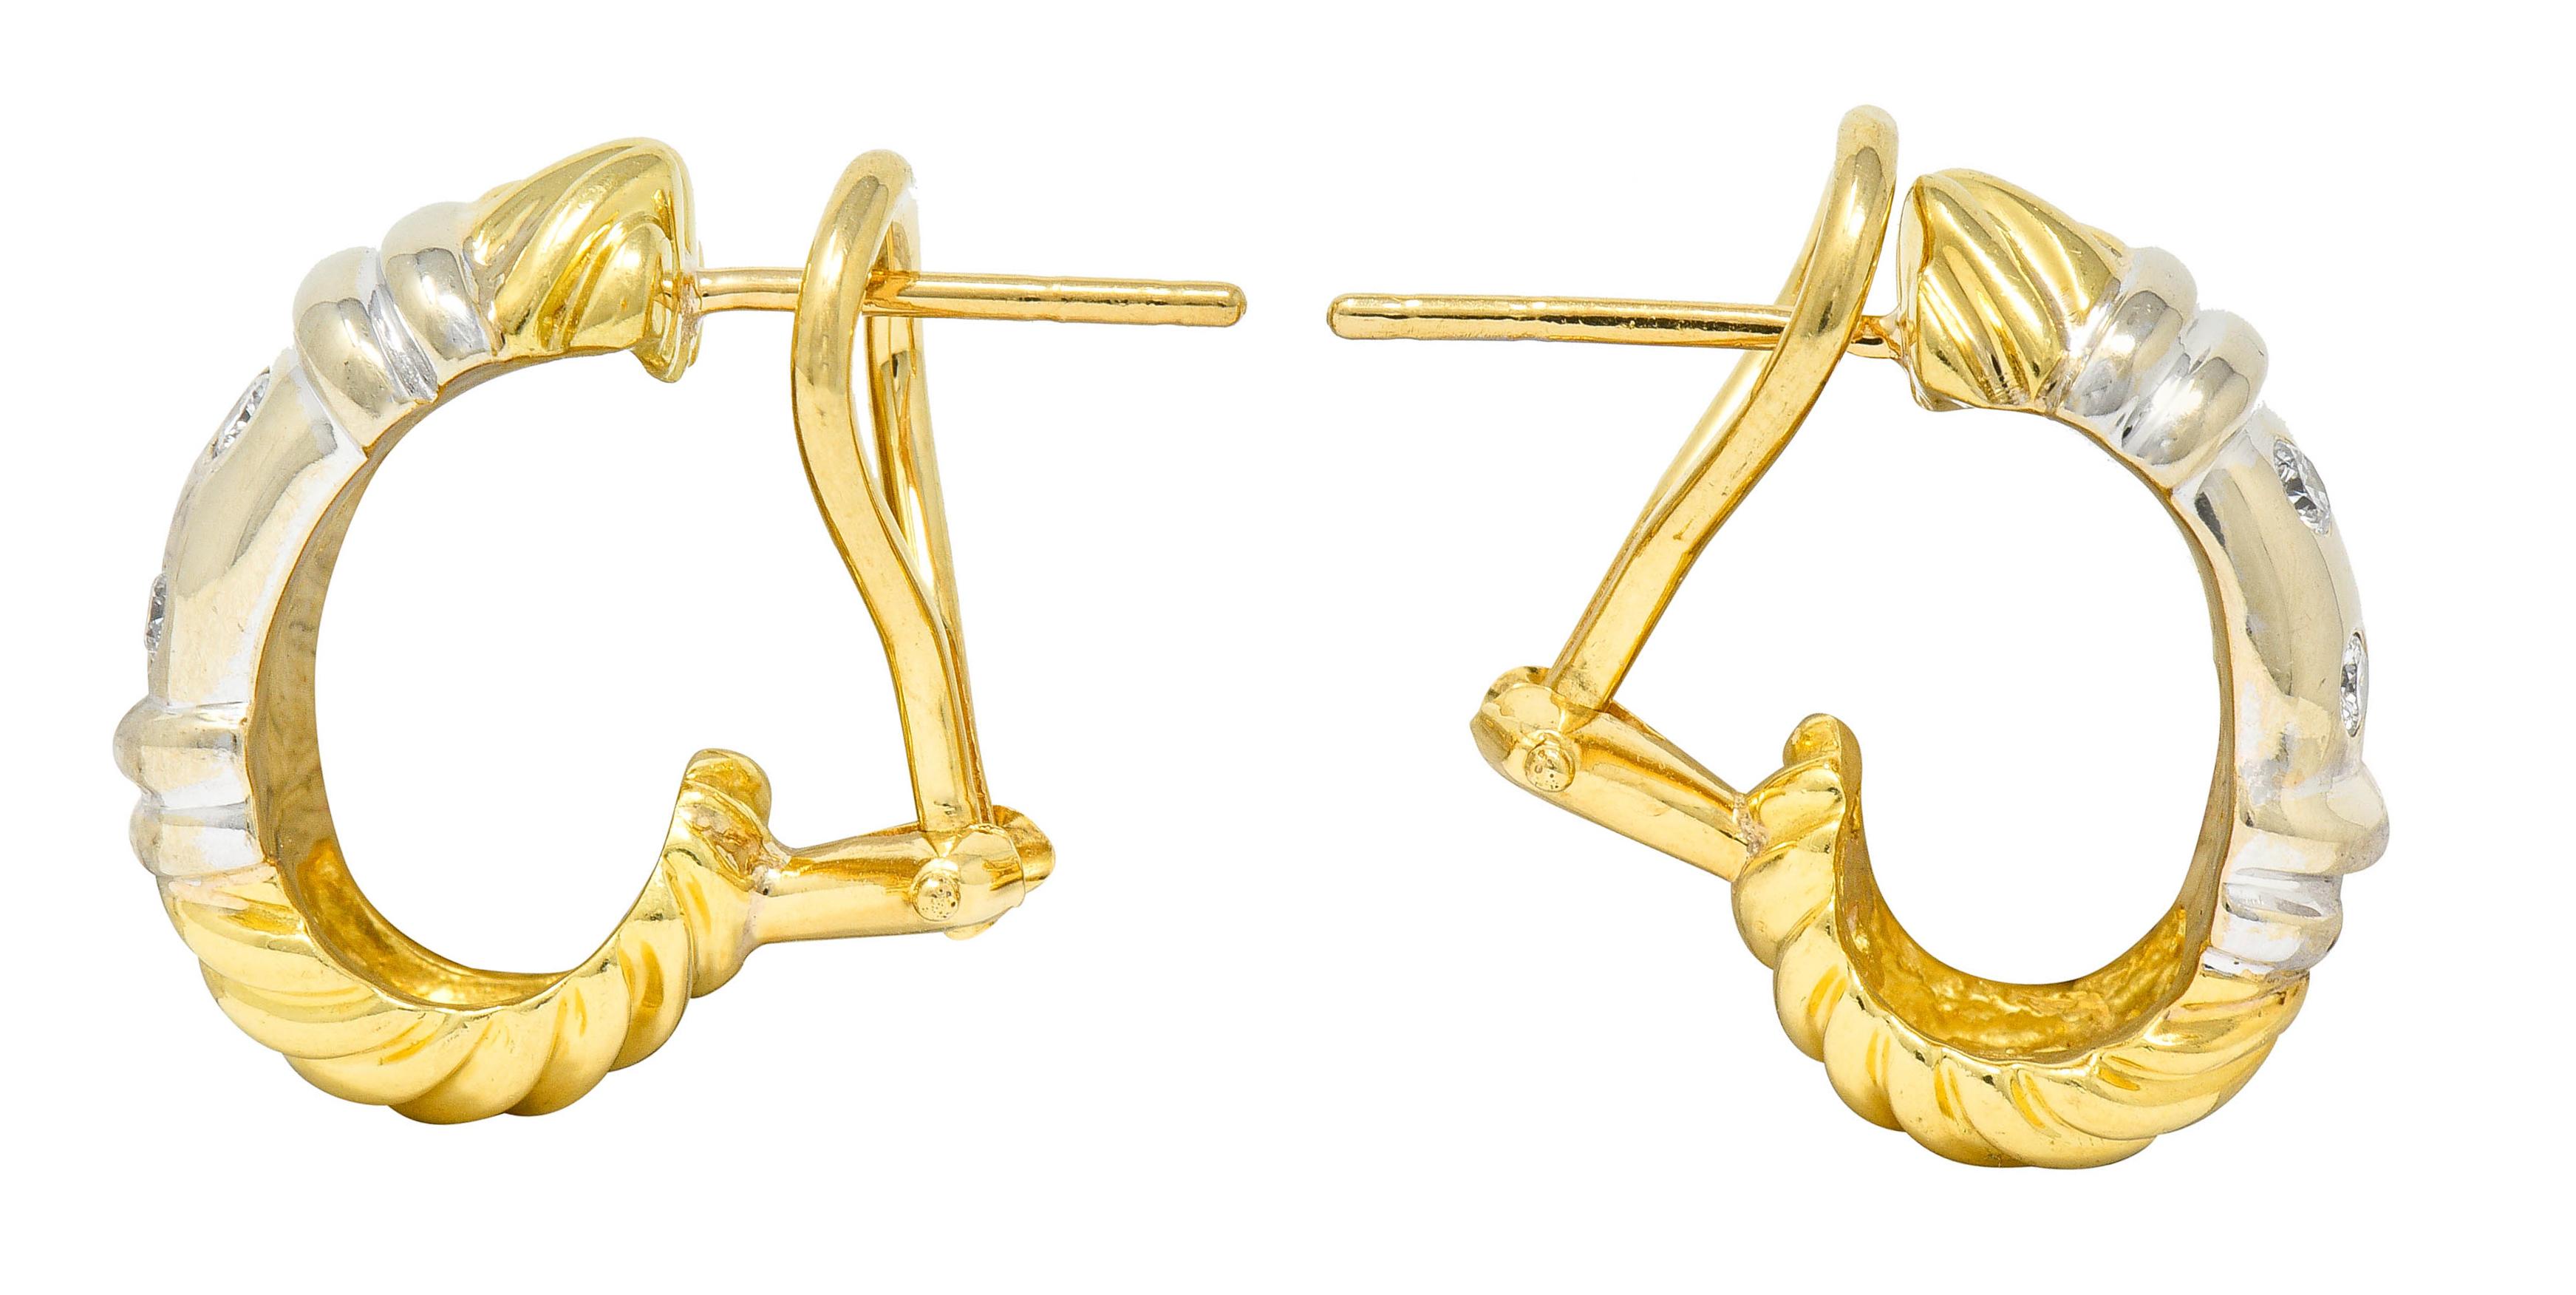 J hoop earrings comprised of yellow gold twisted cable motif and a ribbed sterling silver station

Flush set with round brilliant cut diamonds weighing approximately 0.16 carat; eye-clean and white

Completed by posts and hinged omega backs

Signed